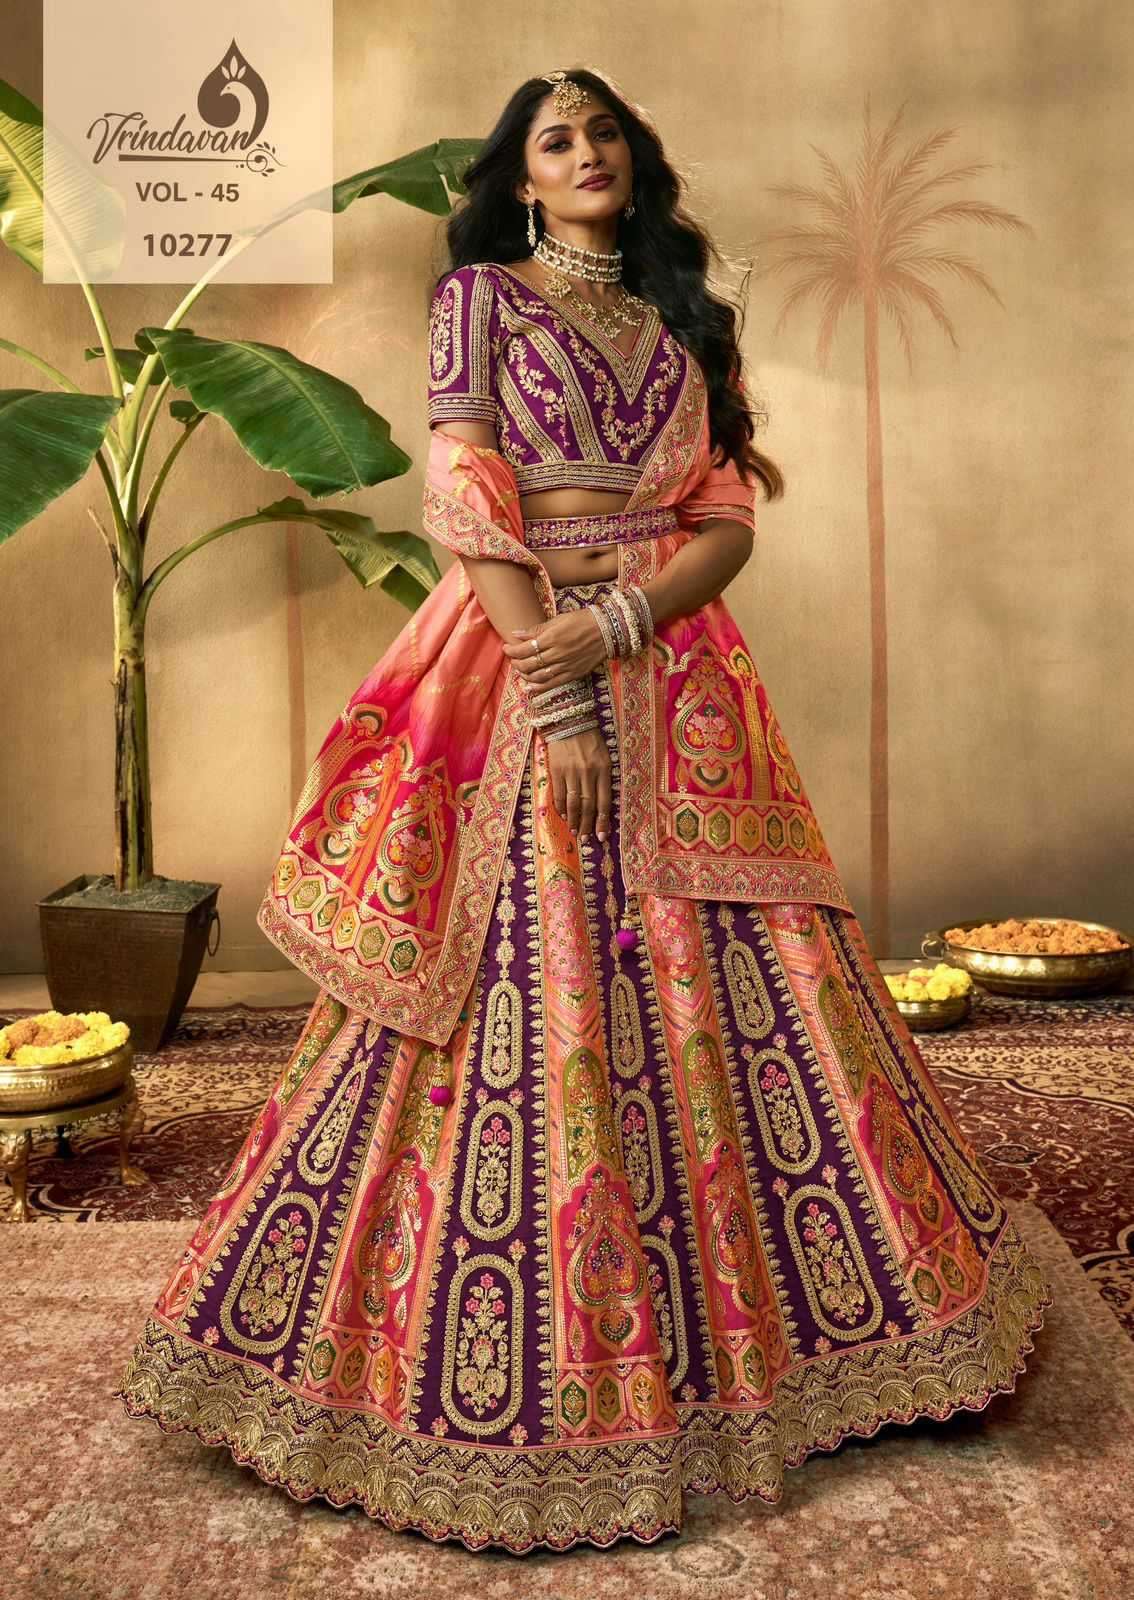 35 Banarasi Lehenga Designs That Every Bride Needs To Check Out For Her  Small Wedding | Indian fashion, Lehenga designs, Designer party wear dresses